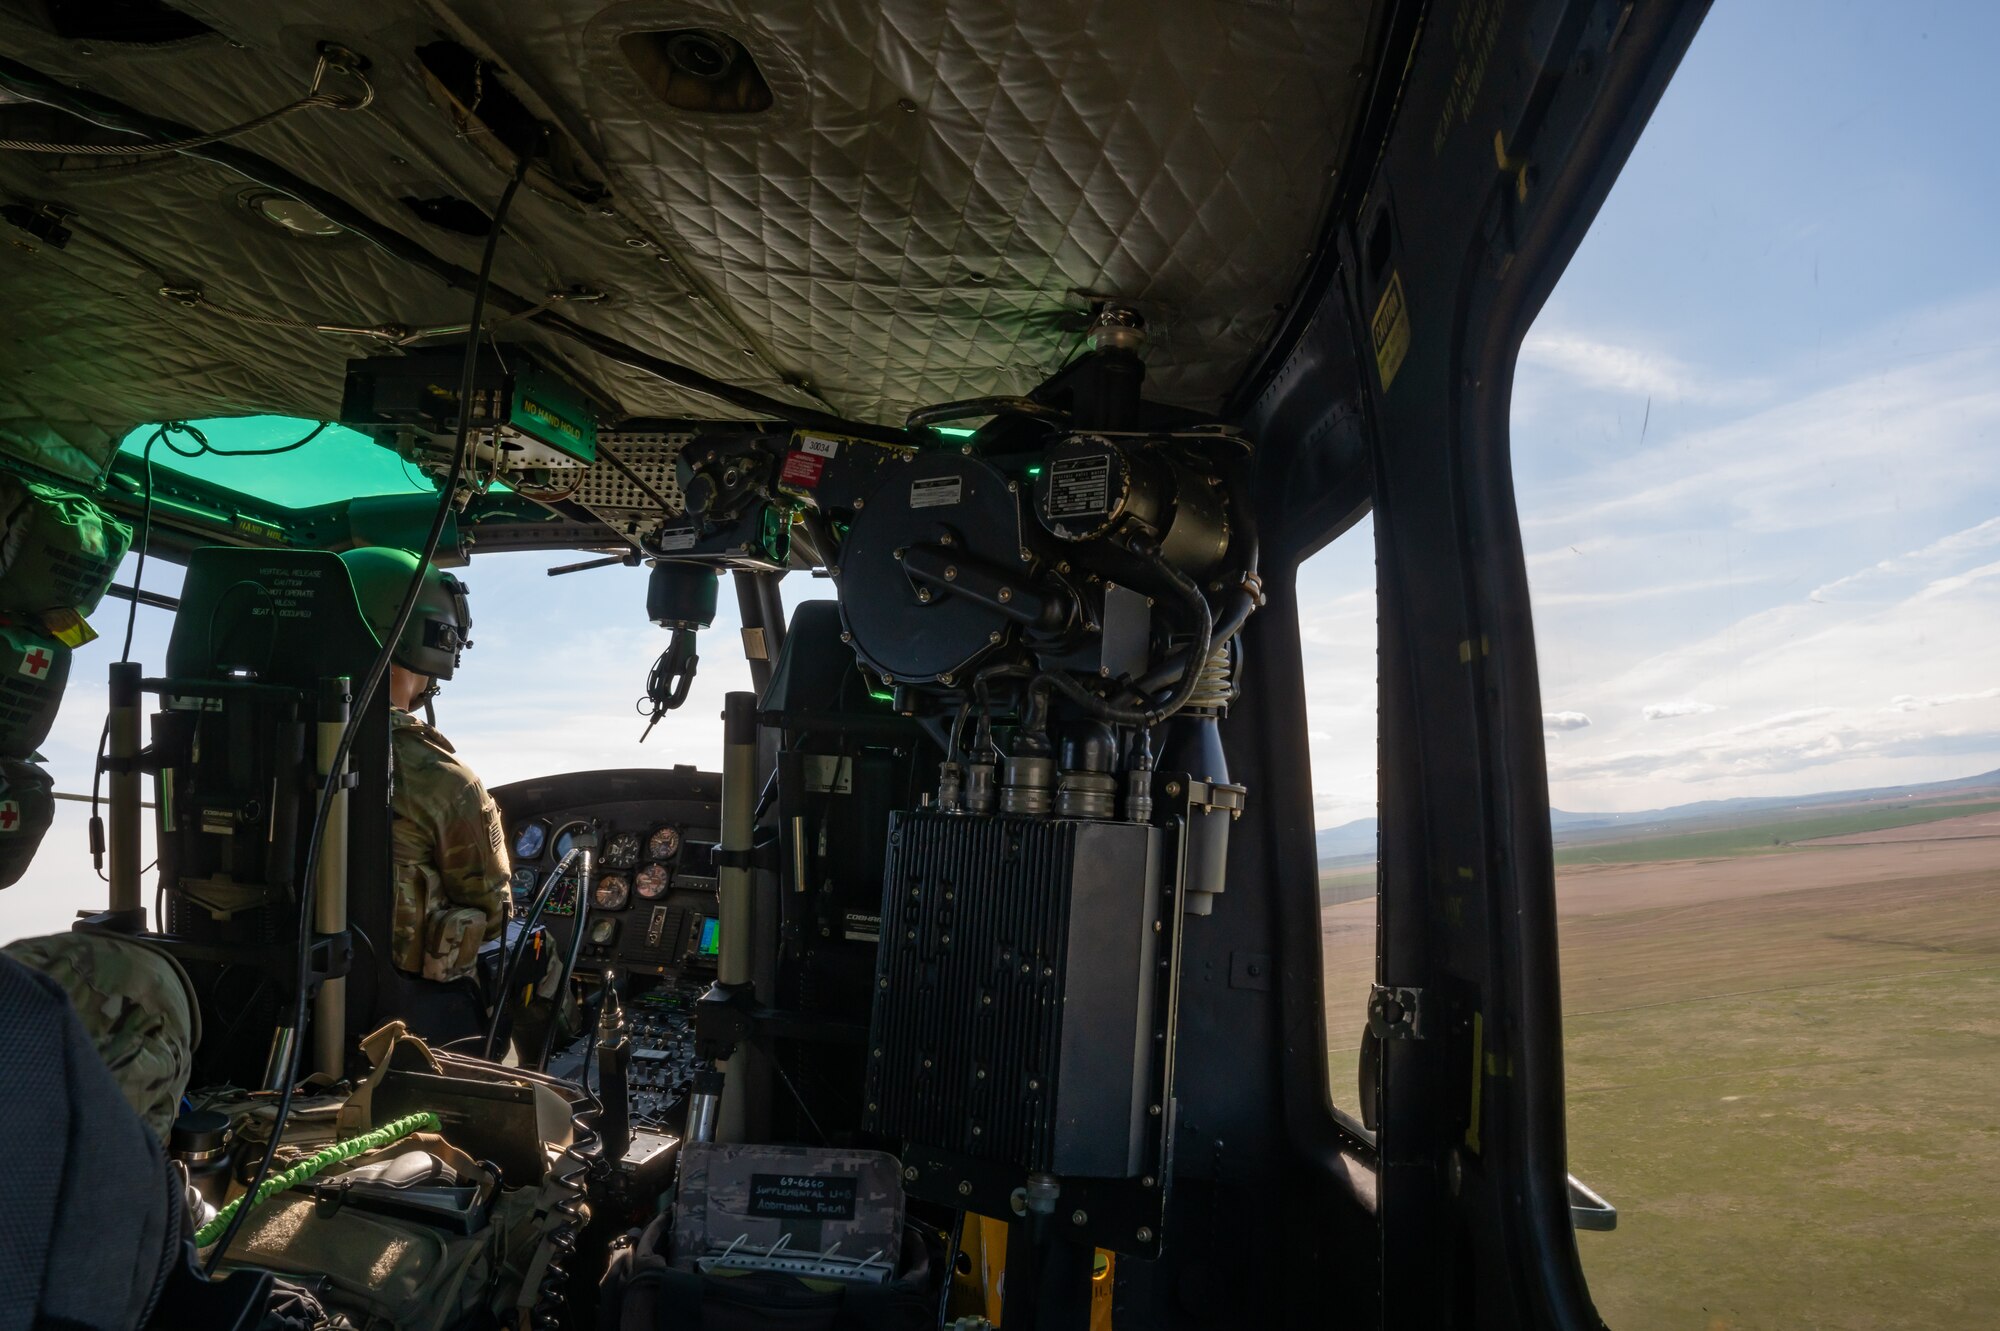 Capt. Scott Rumsey, 40th Helicopter Squadron pilot, performs co-pilot duties inside a UH-1N Huey helicopter May 24, 2022, over the Highwood Mountains near Great Falls, Mont.